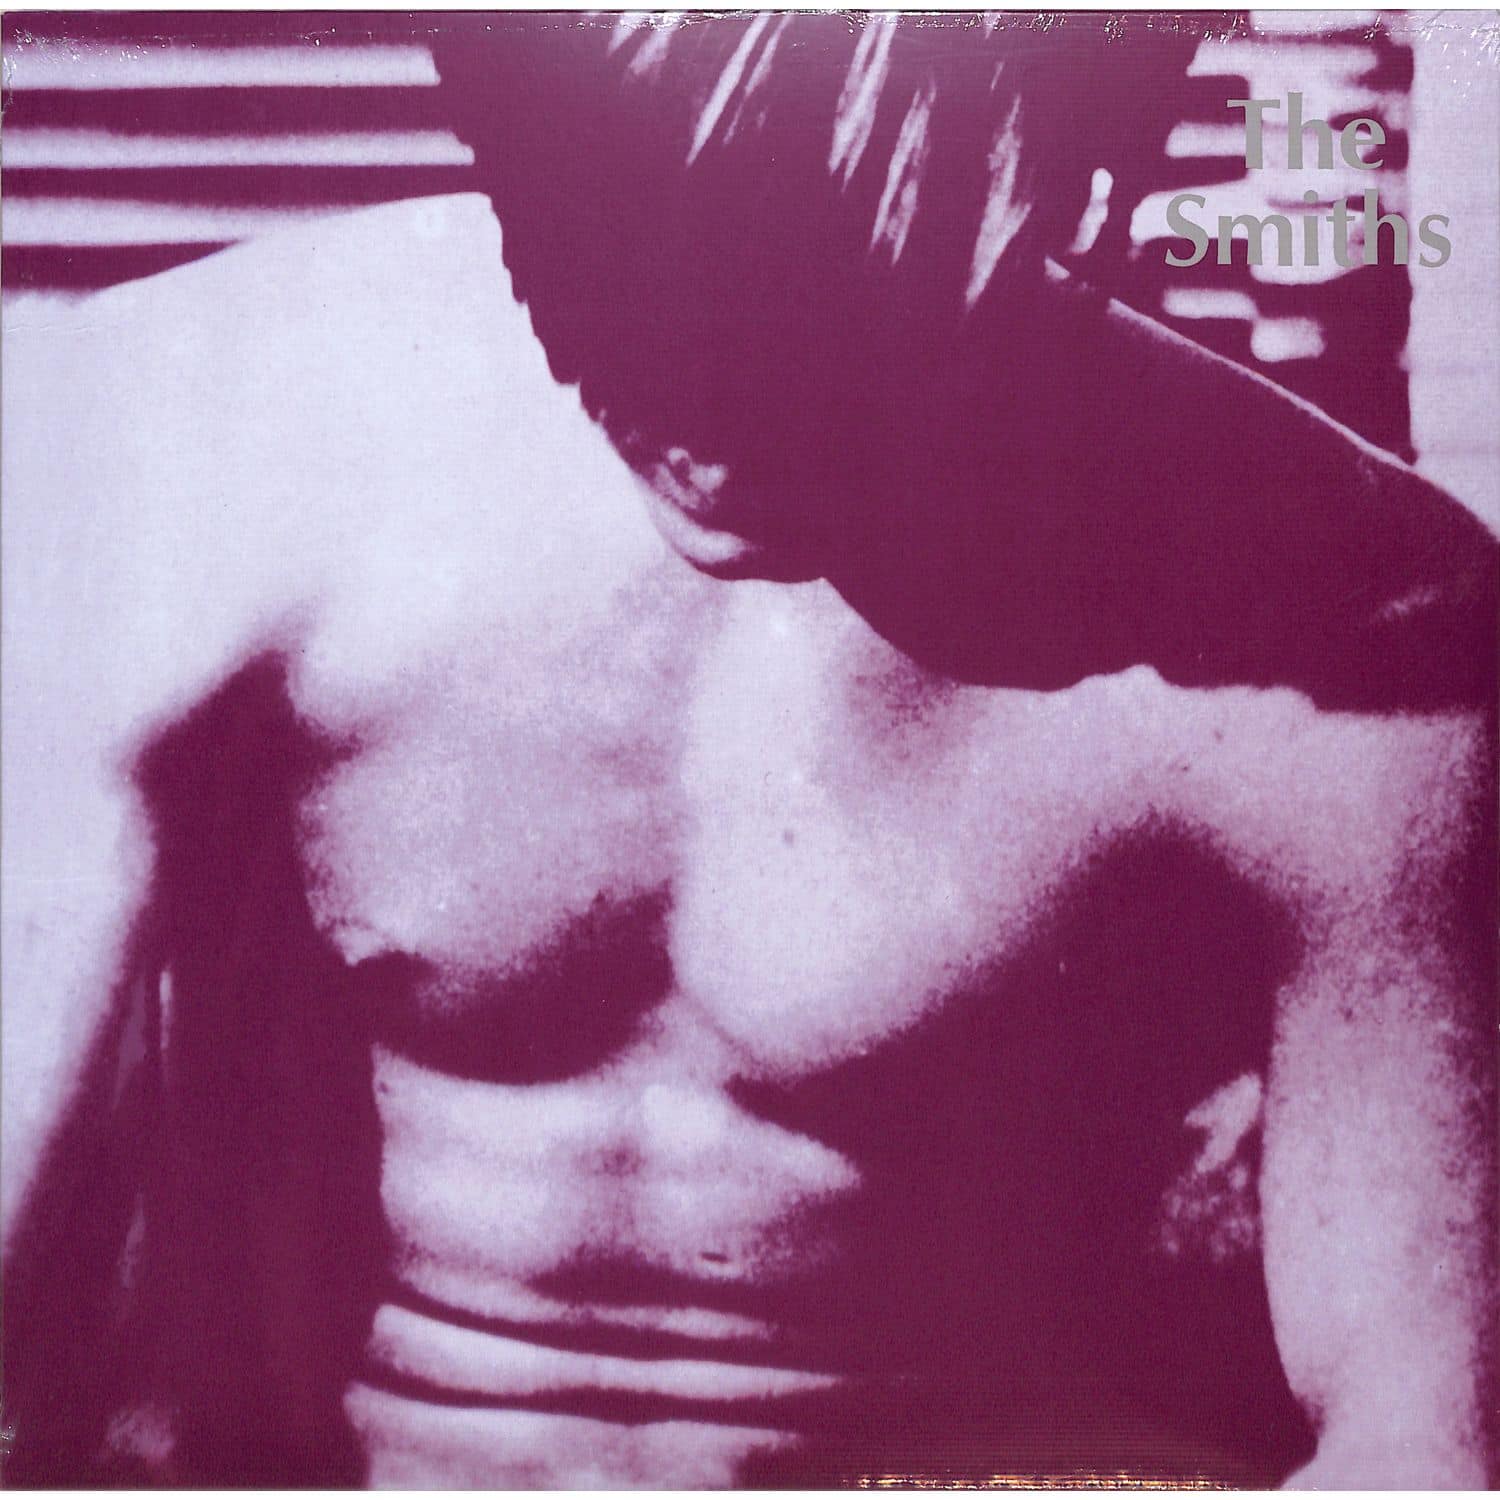 The Smiths - THE SMITHS 